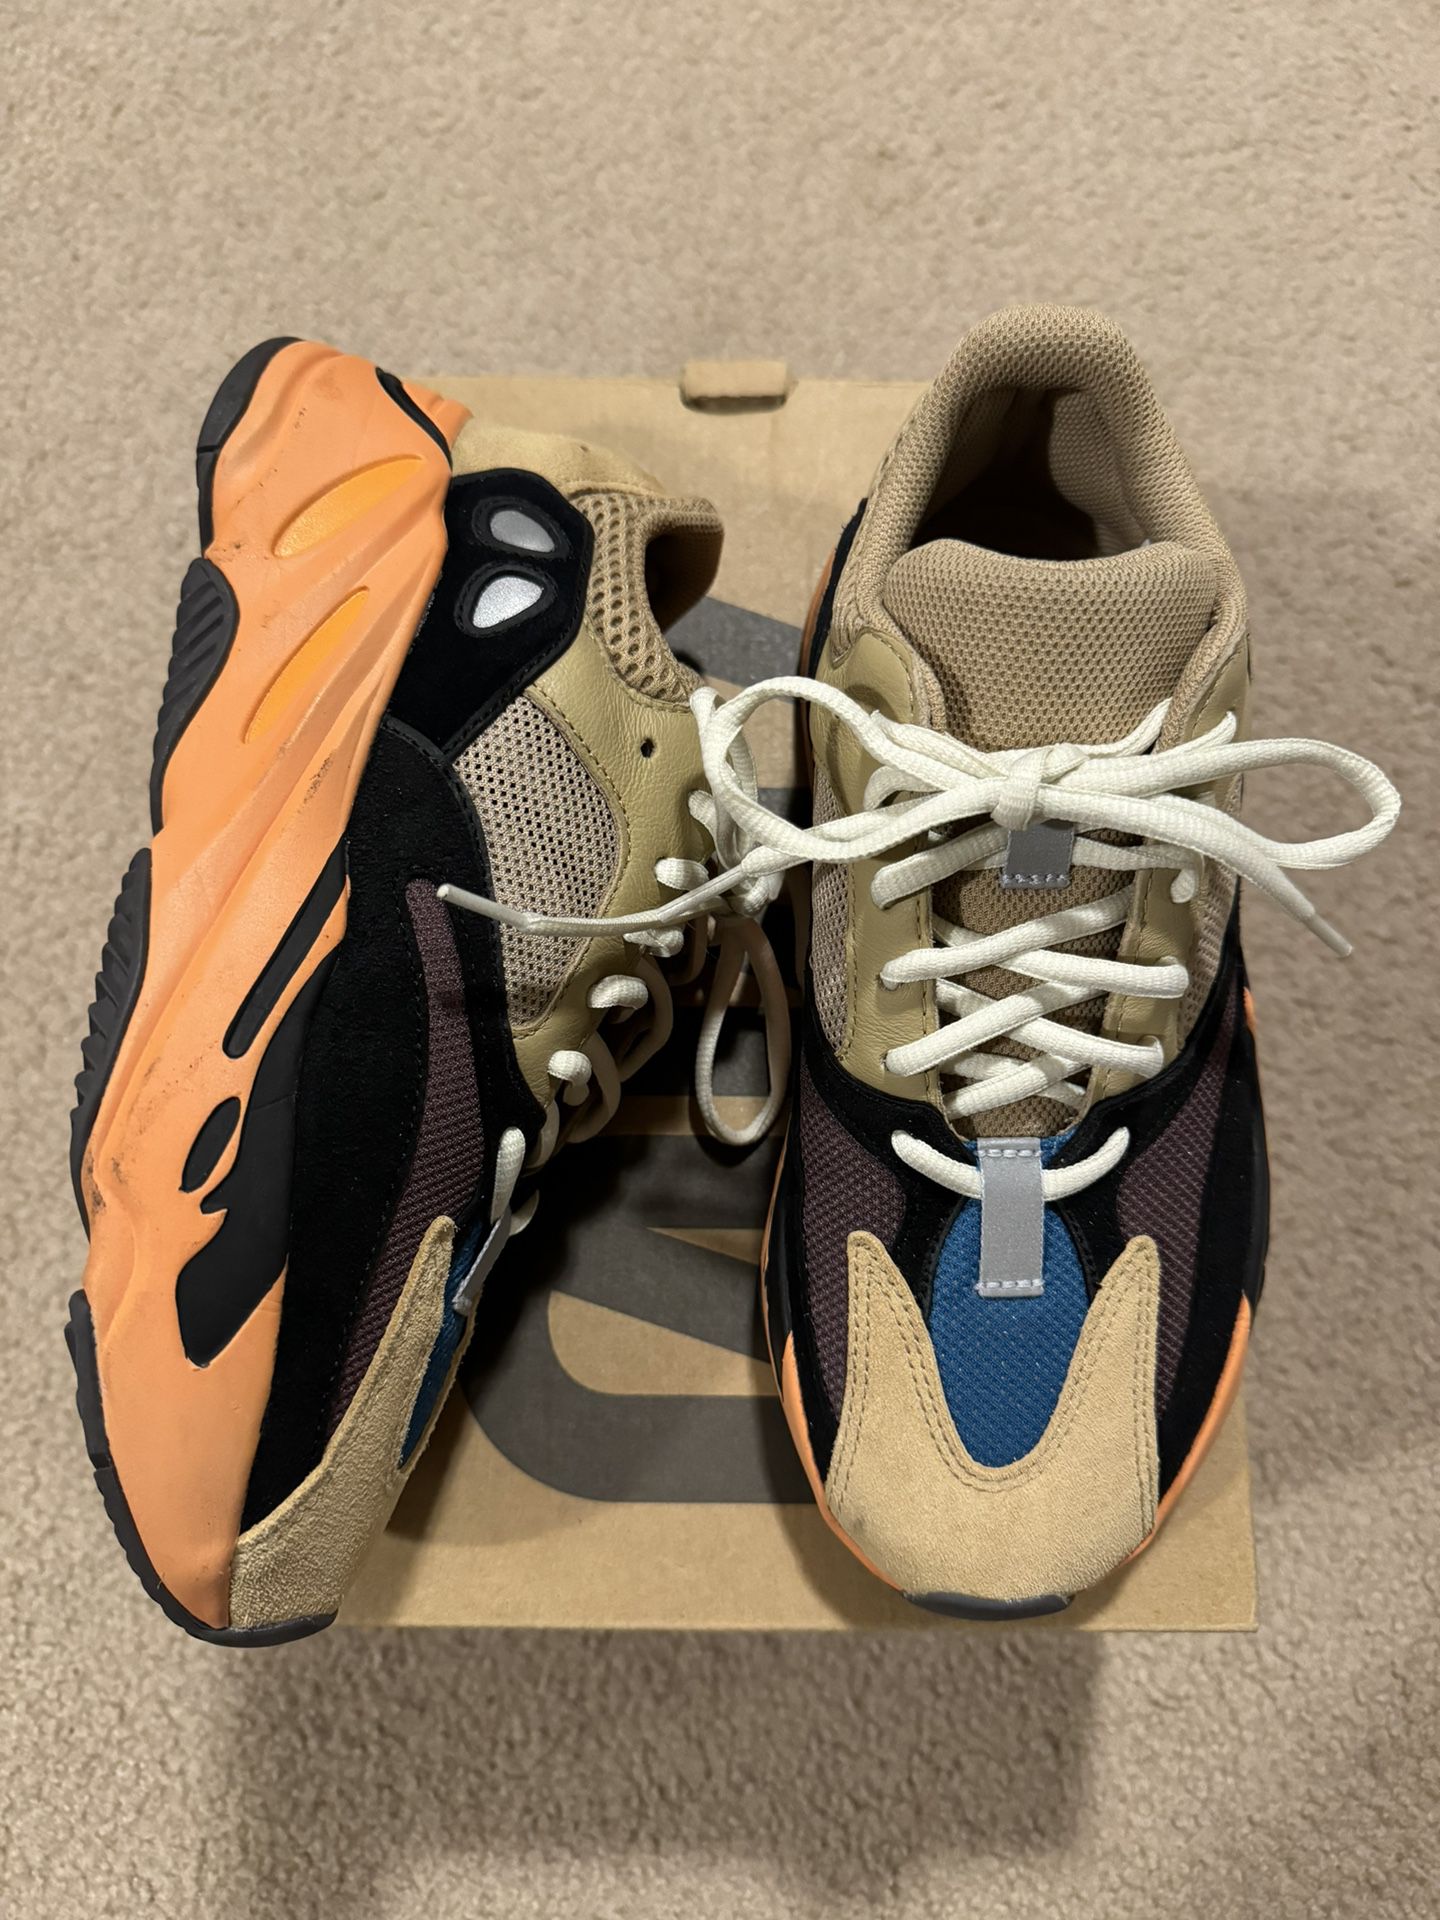 Adidas Yeezy Boost 700 'Enflame Amber' Size 6.5